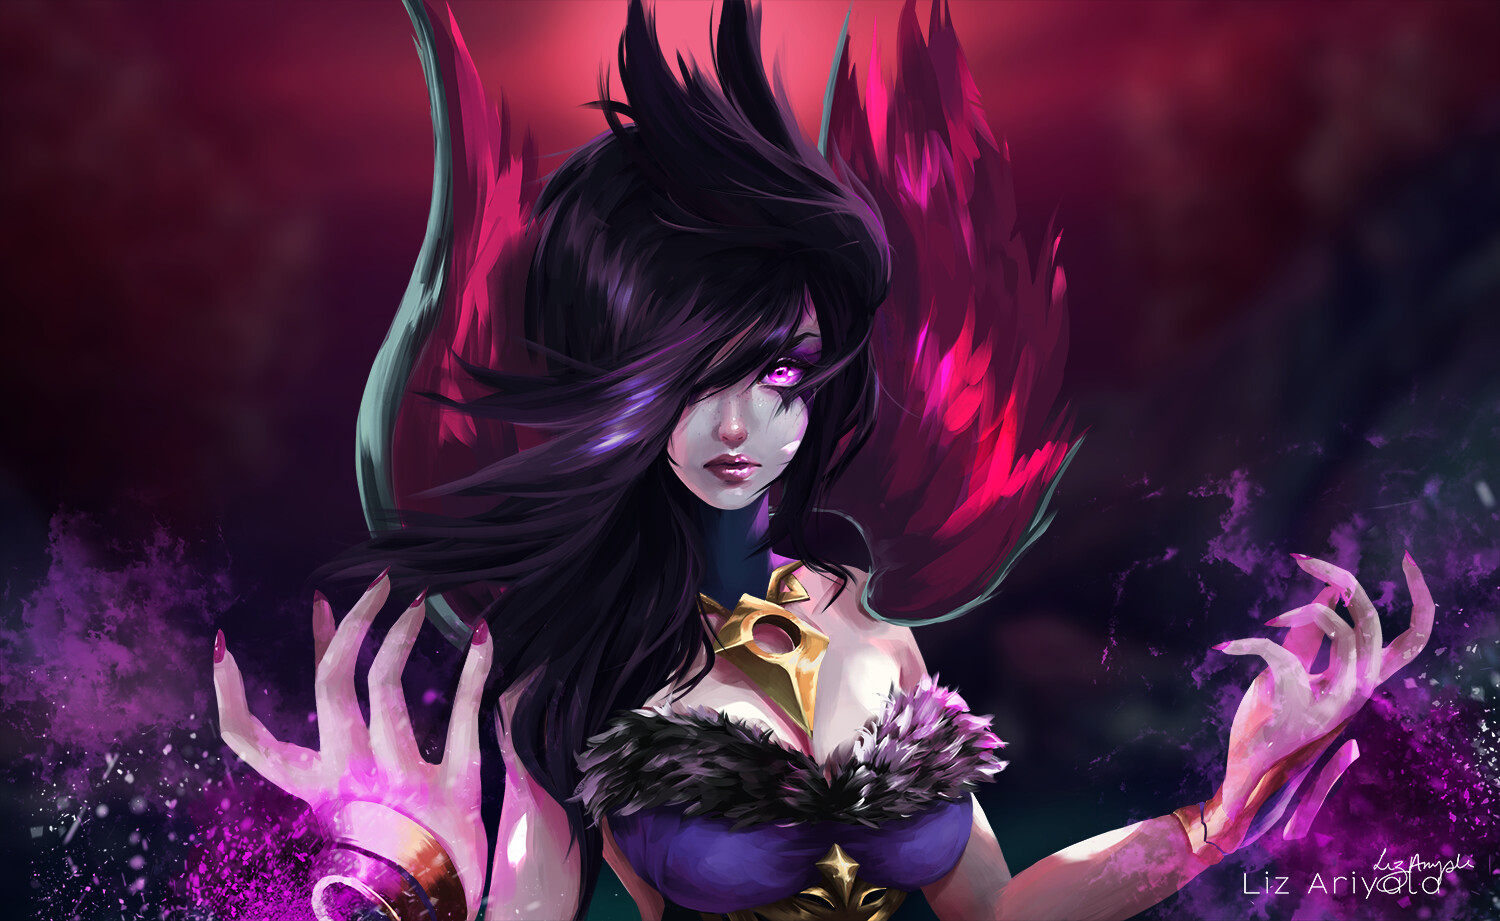 Fanart of the new reworked Morgana from League! 